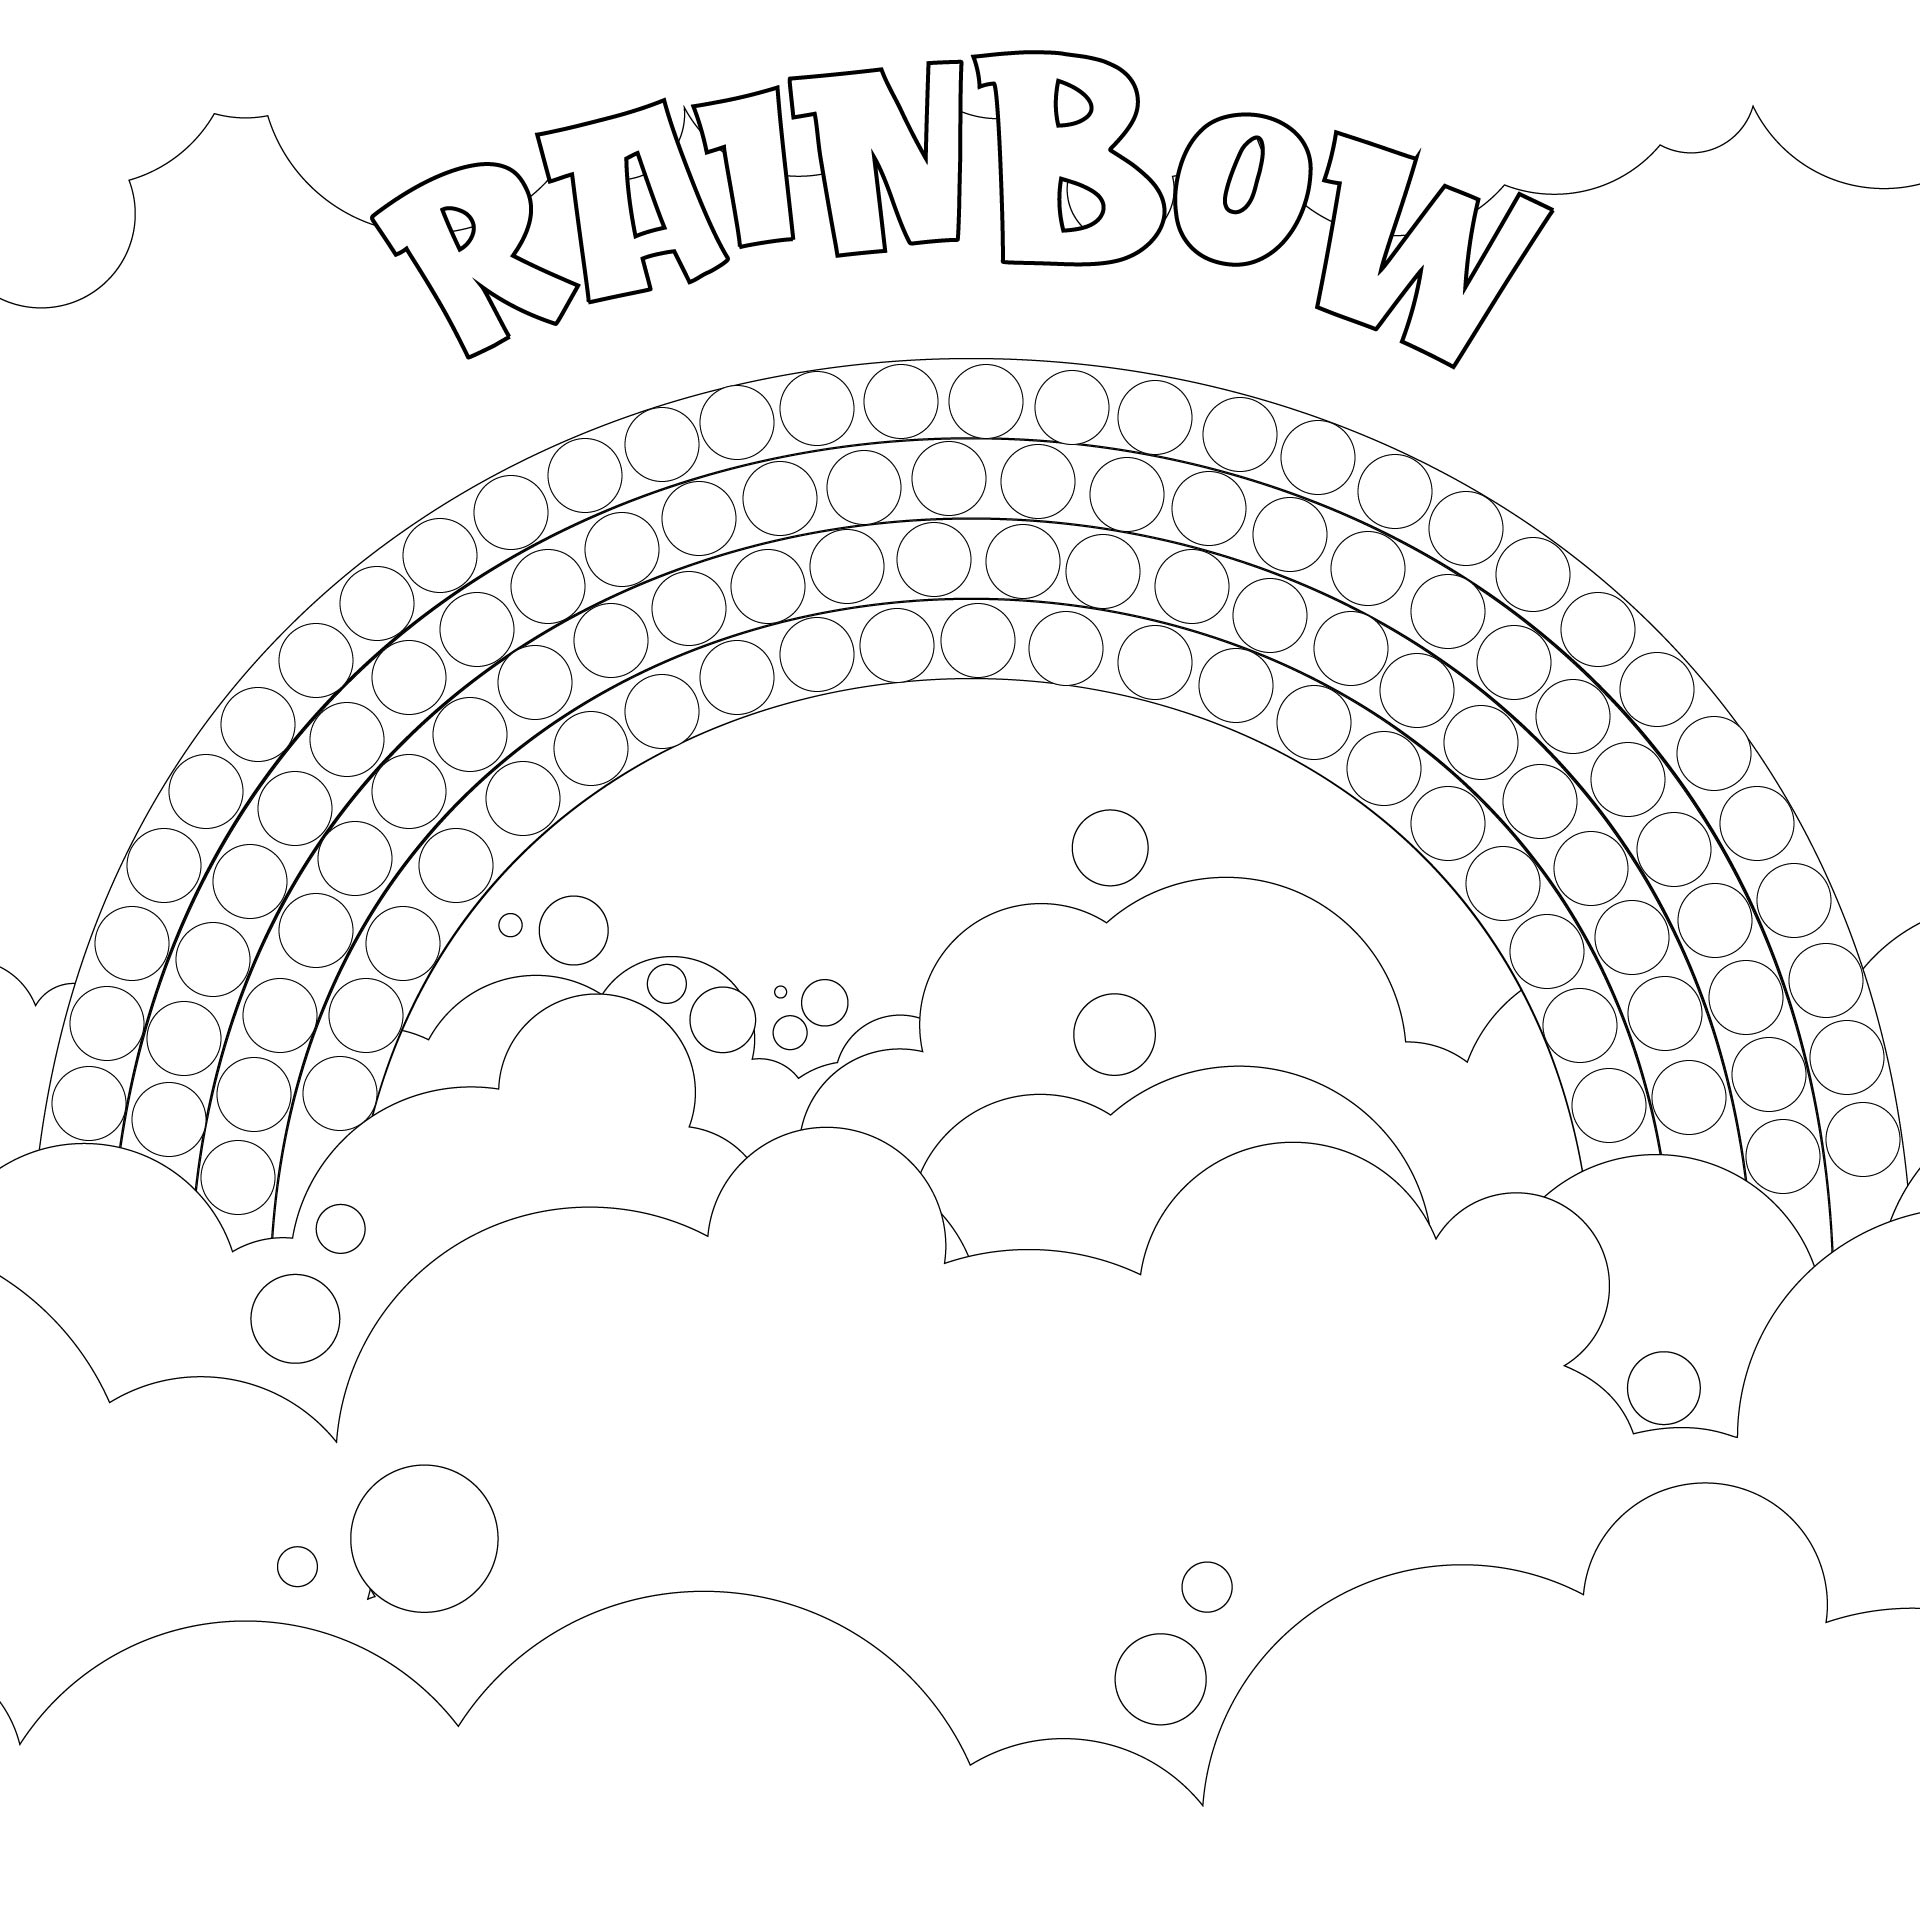 Rainbow Template To Print Coloring Pages Of Rainbows Sketch Coloring Page